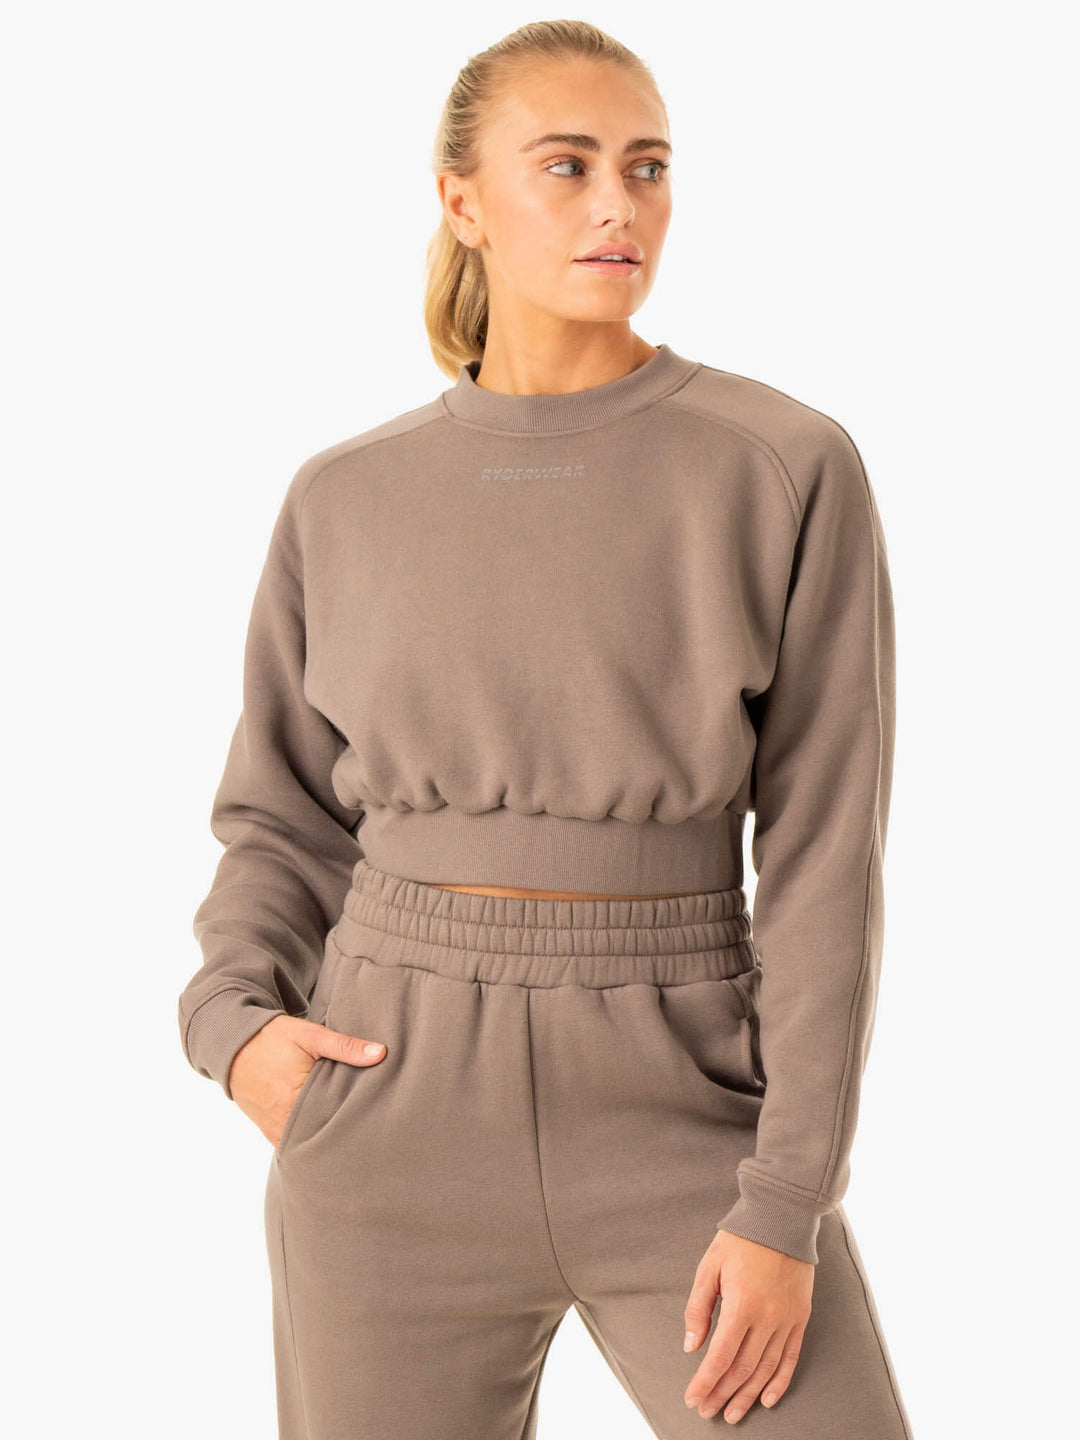 Sideline Sweater - Taupe Clothing Ryderwear 